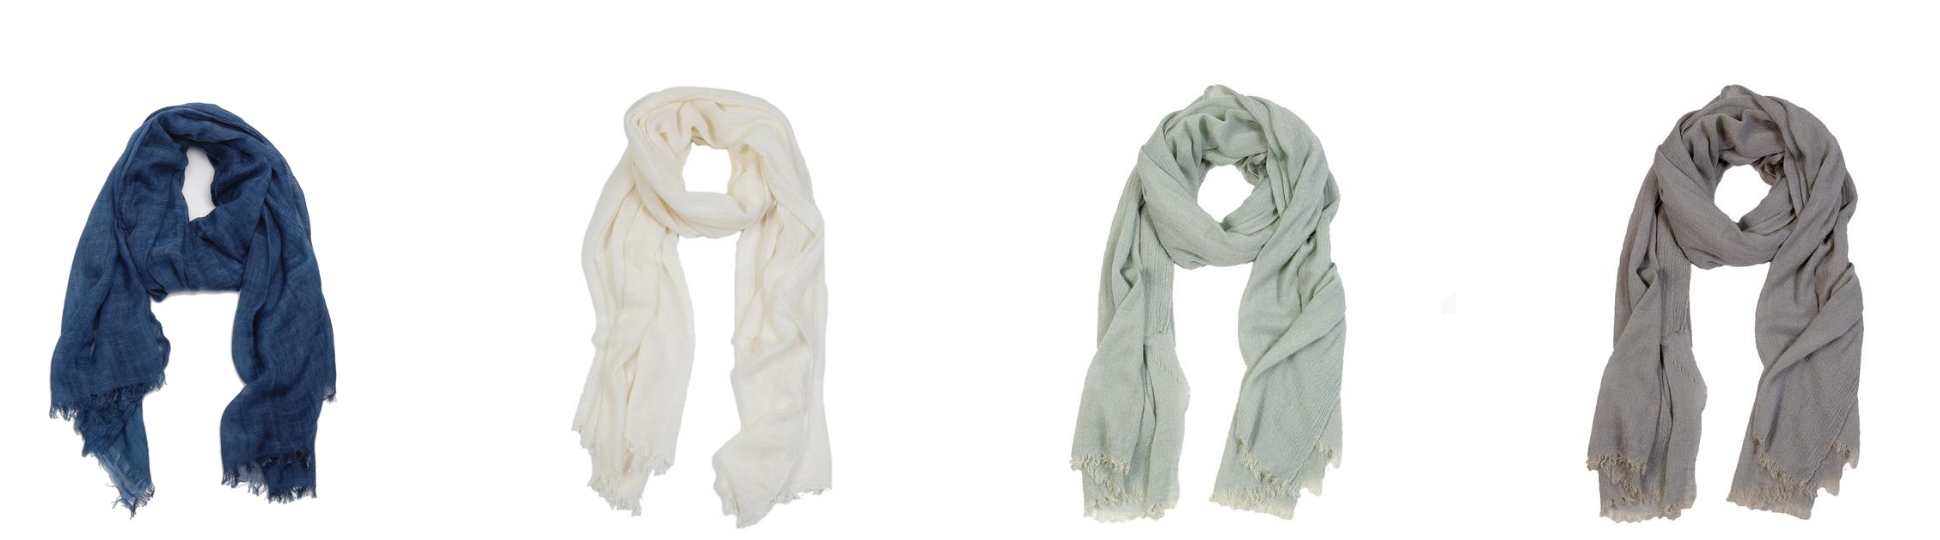 Summery Scarves!